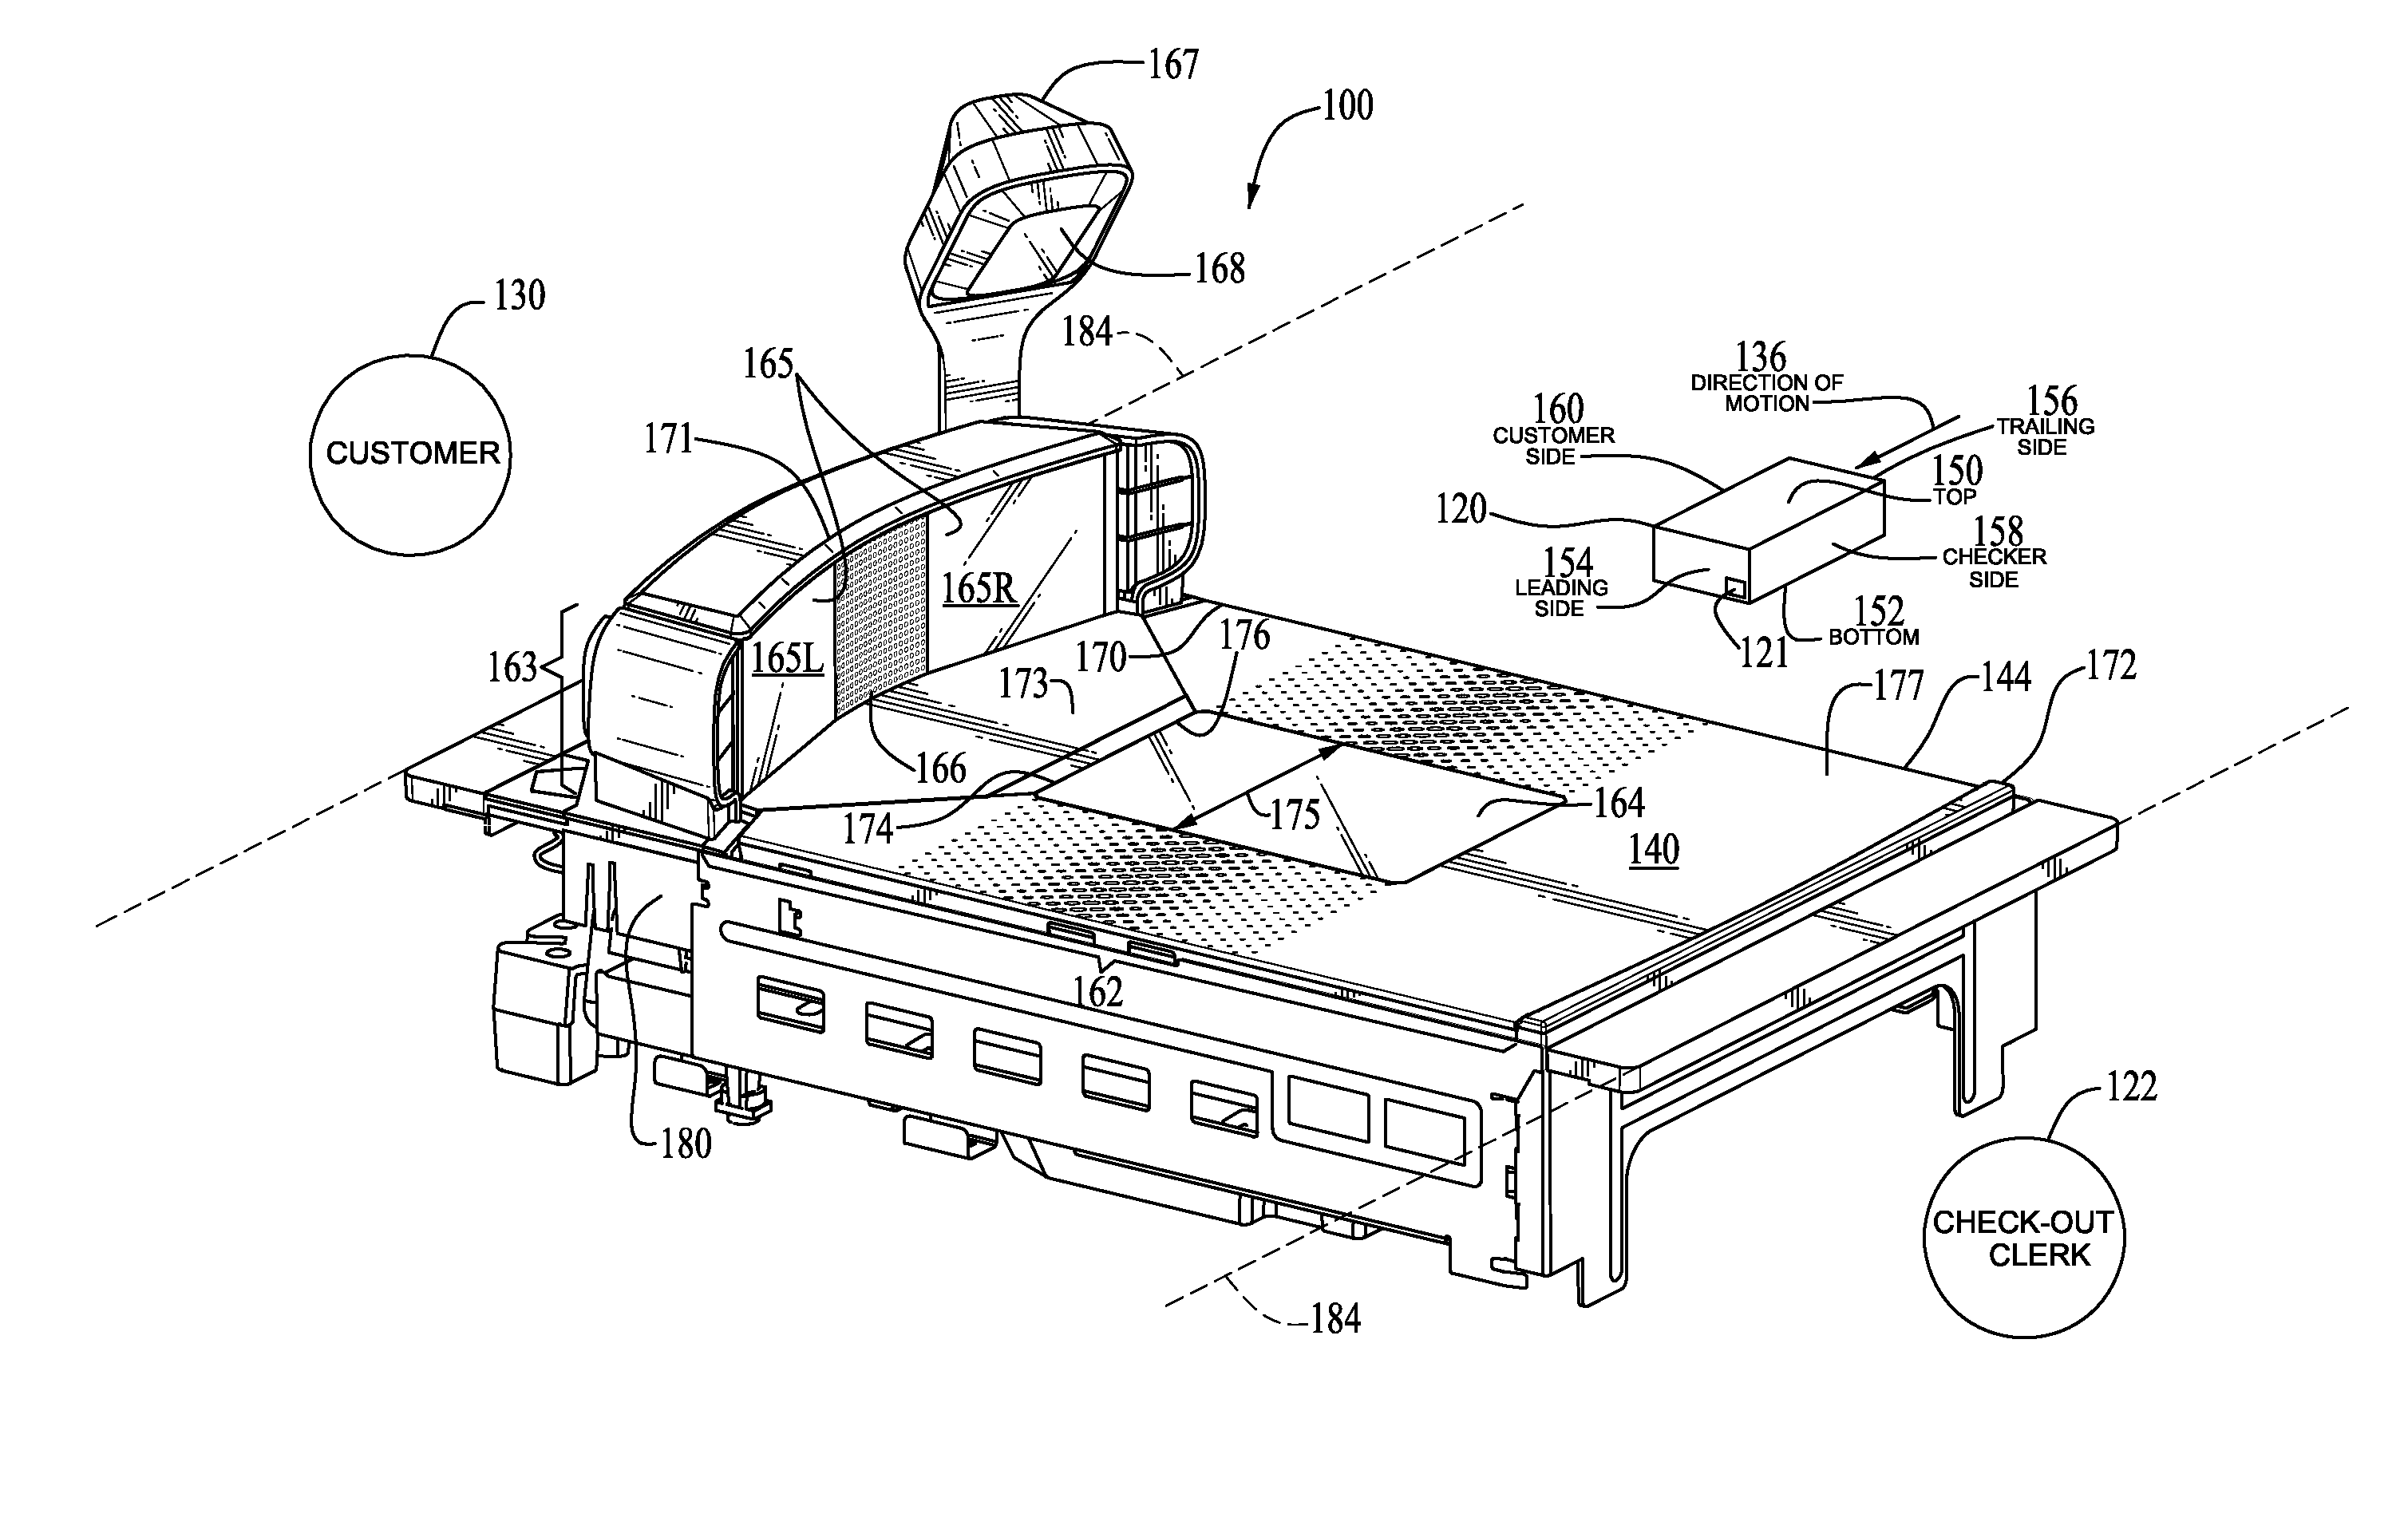 Data reader platter with integral features delineating a data-reading sweep region